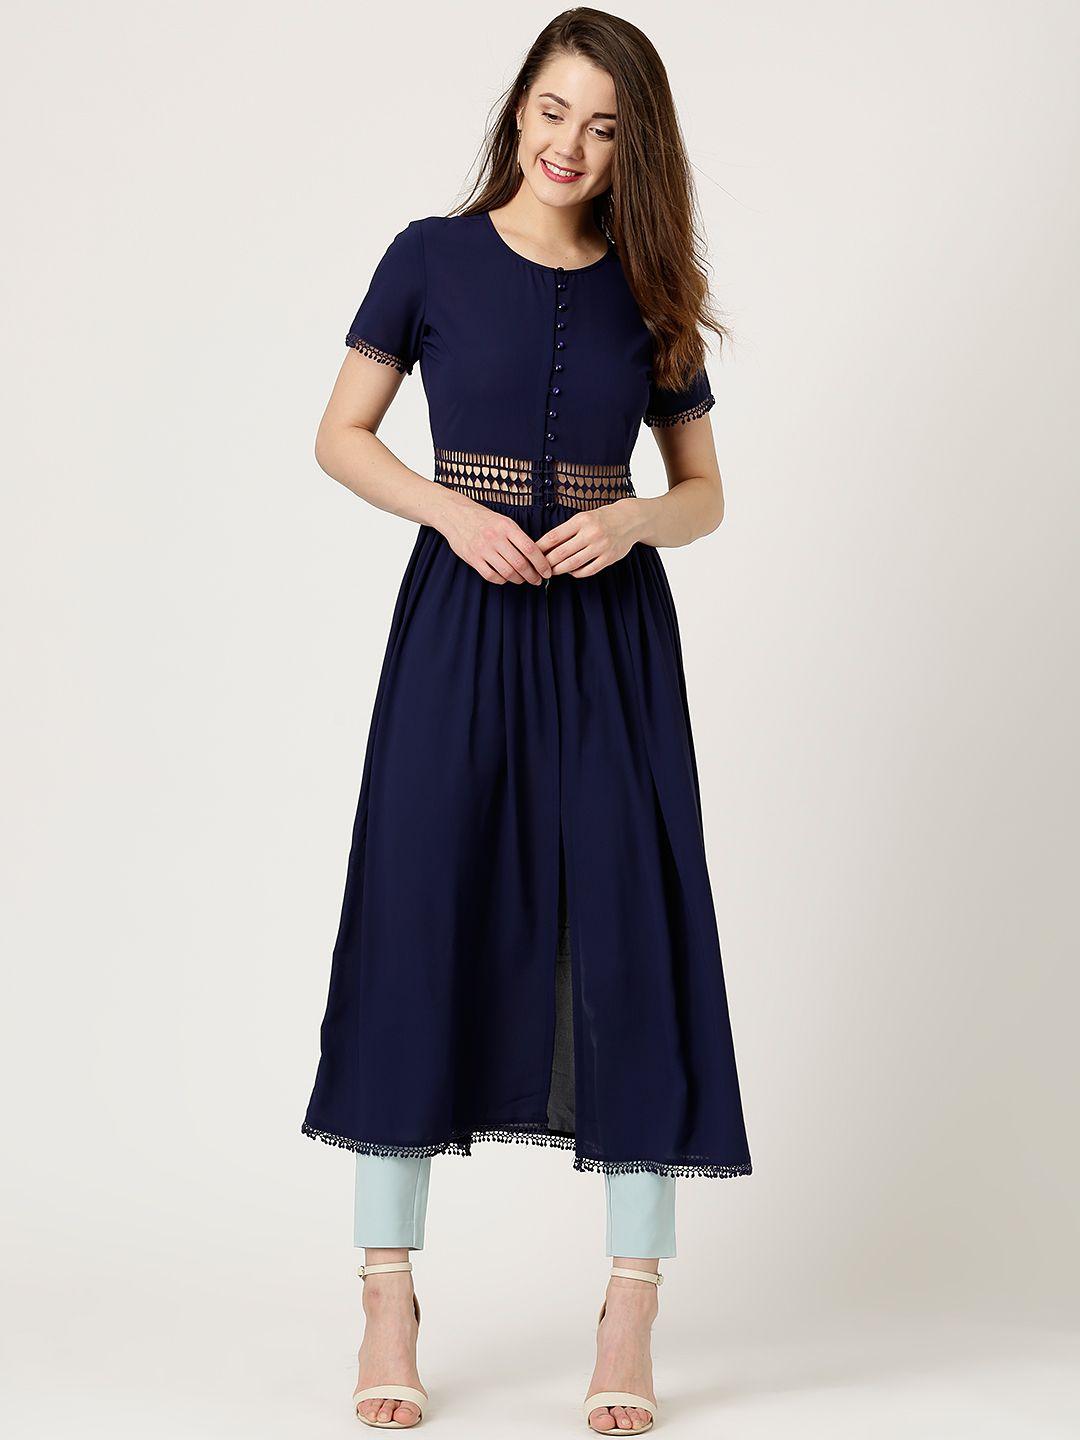 marie claire women navy solid maxi top